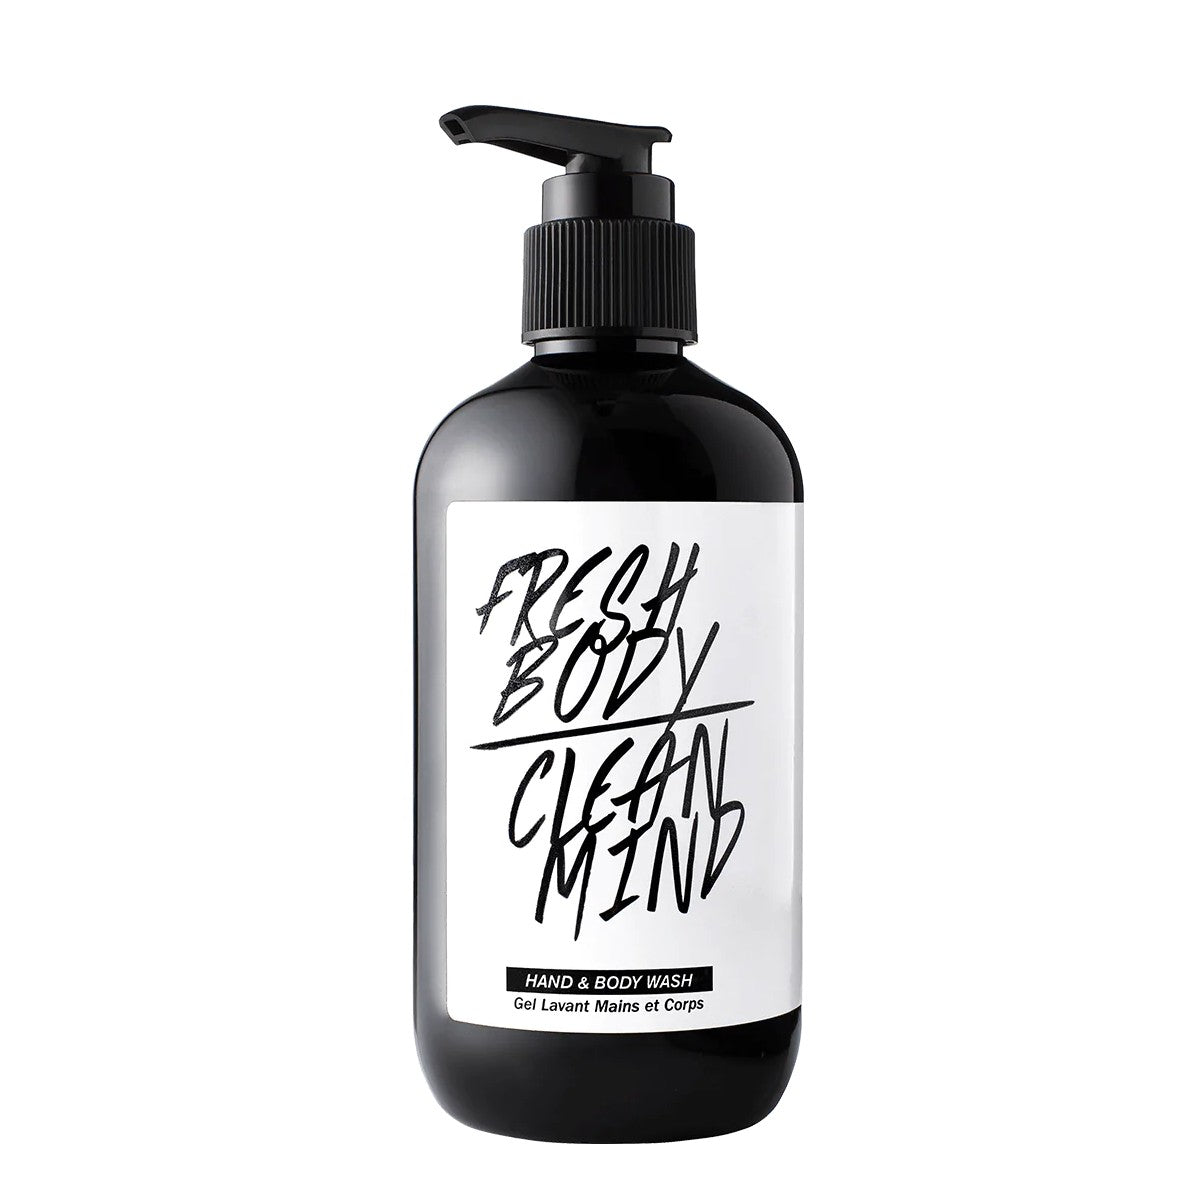 Doers of London Hand & Body Wash 